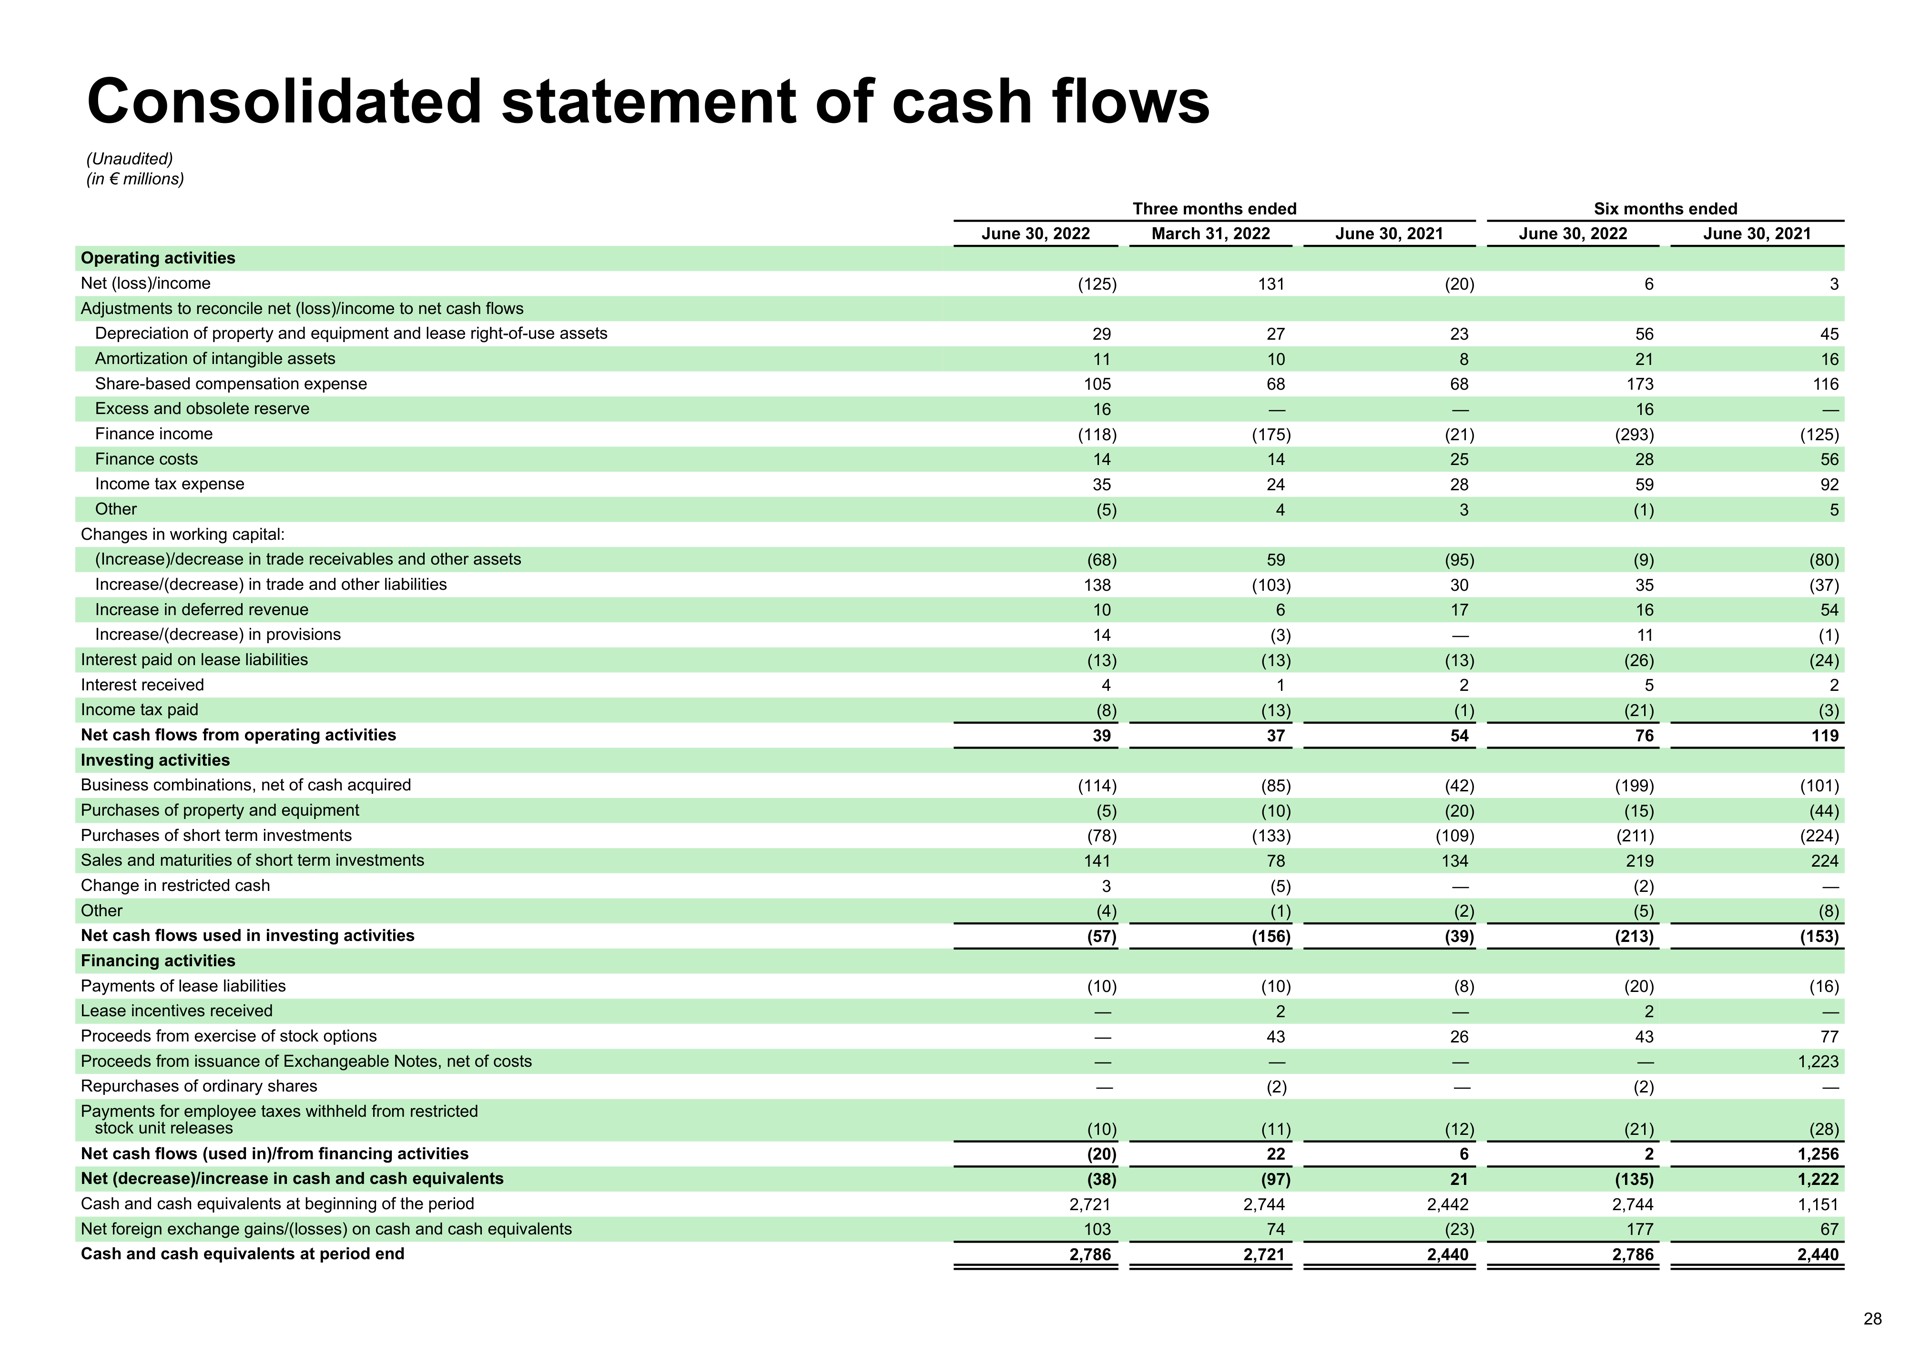 consolidated statement of cash flows | Spotify